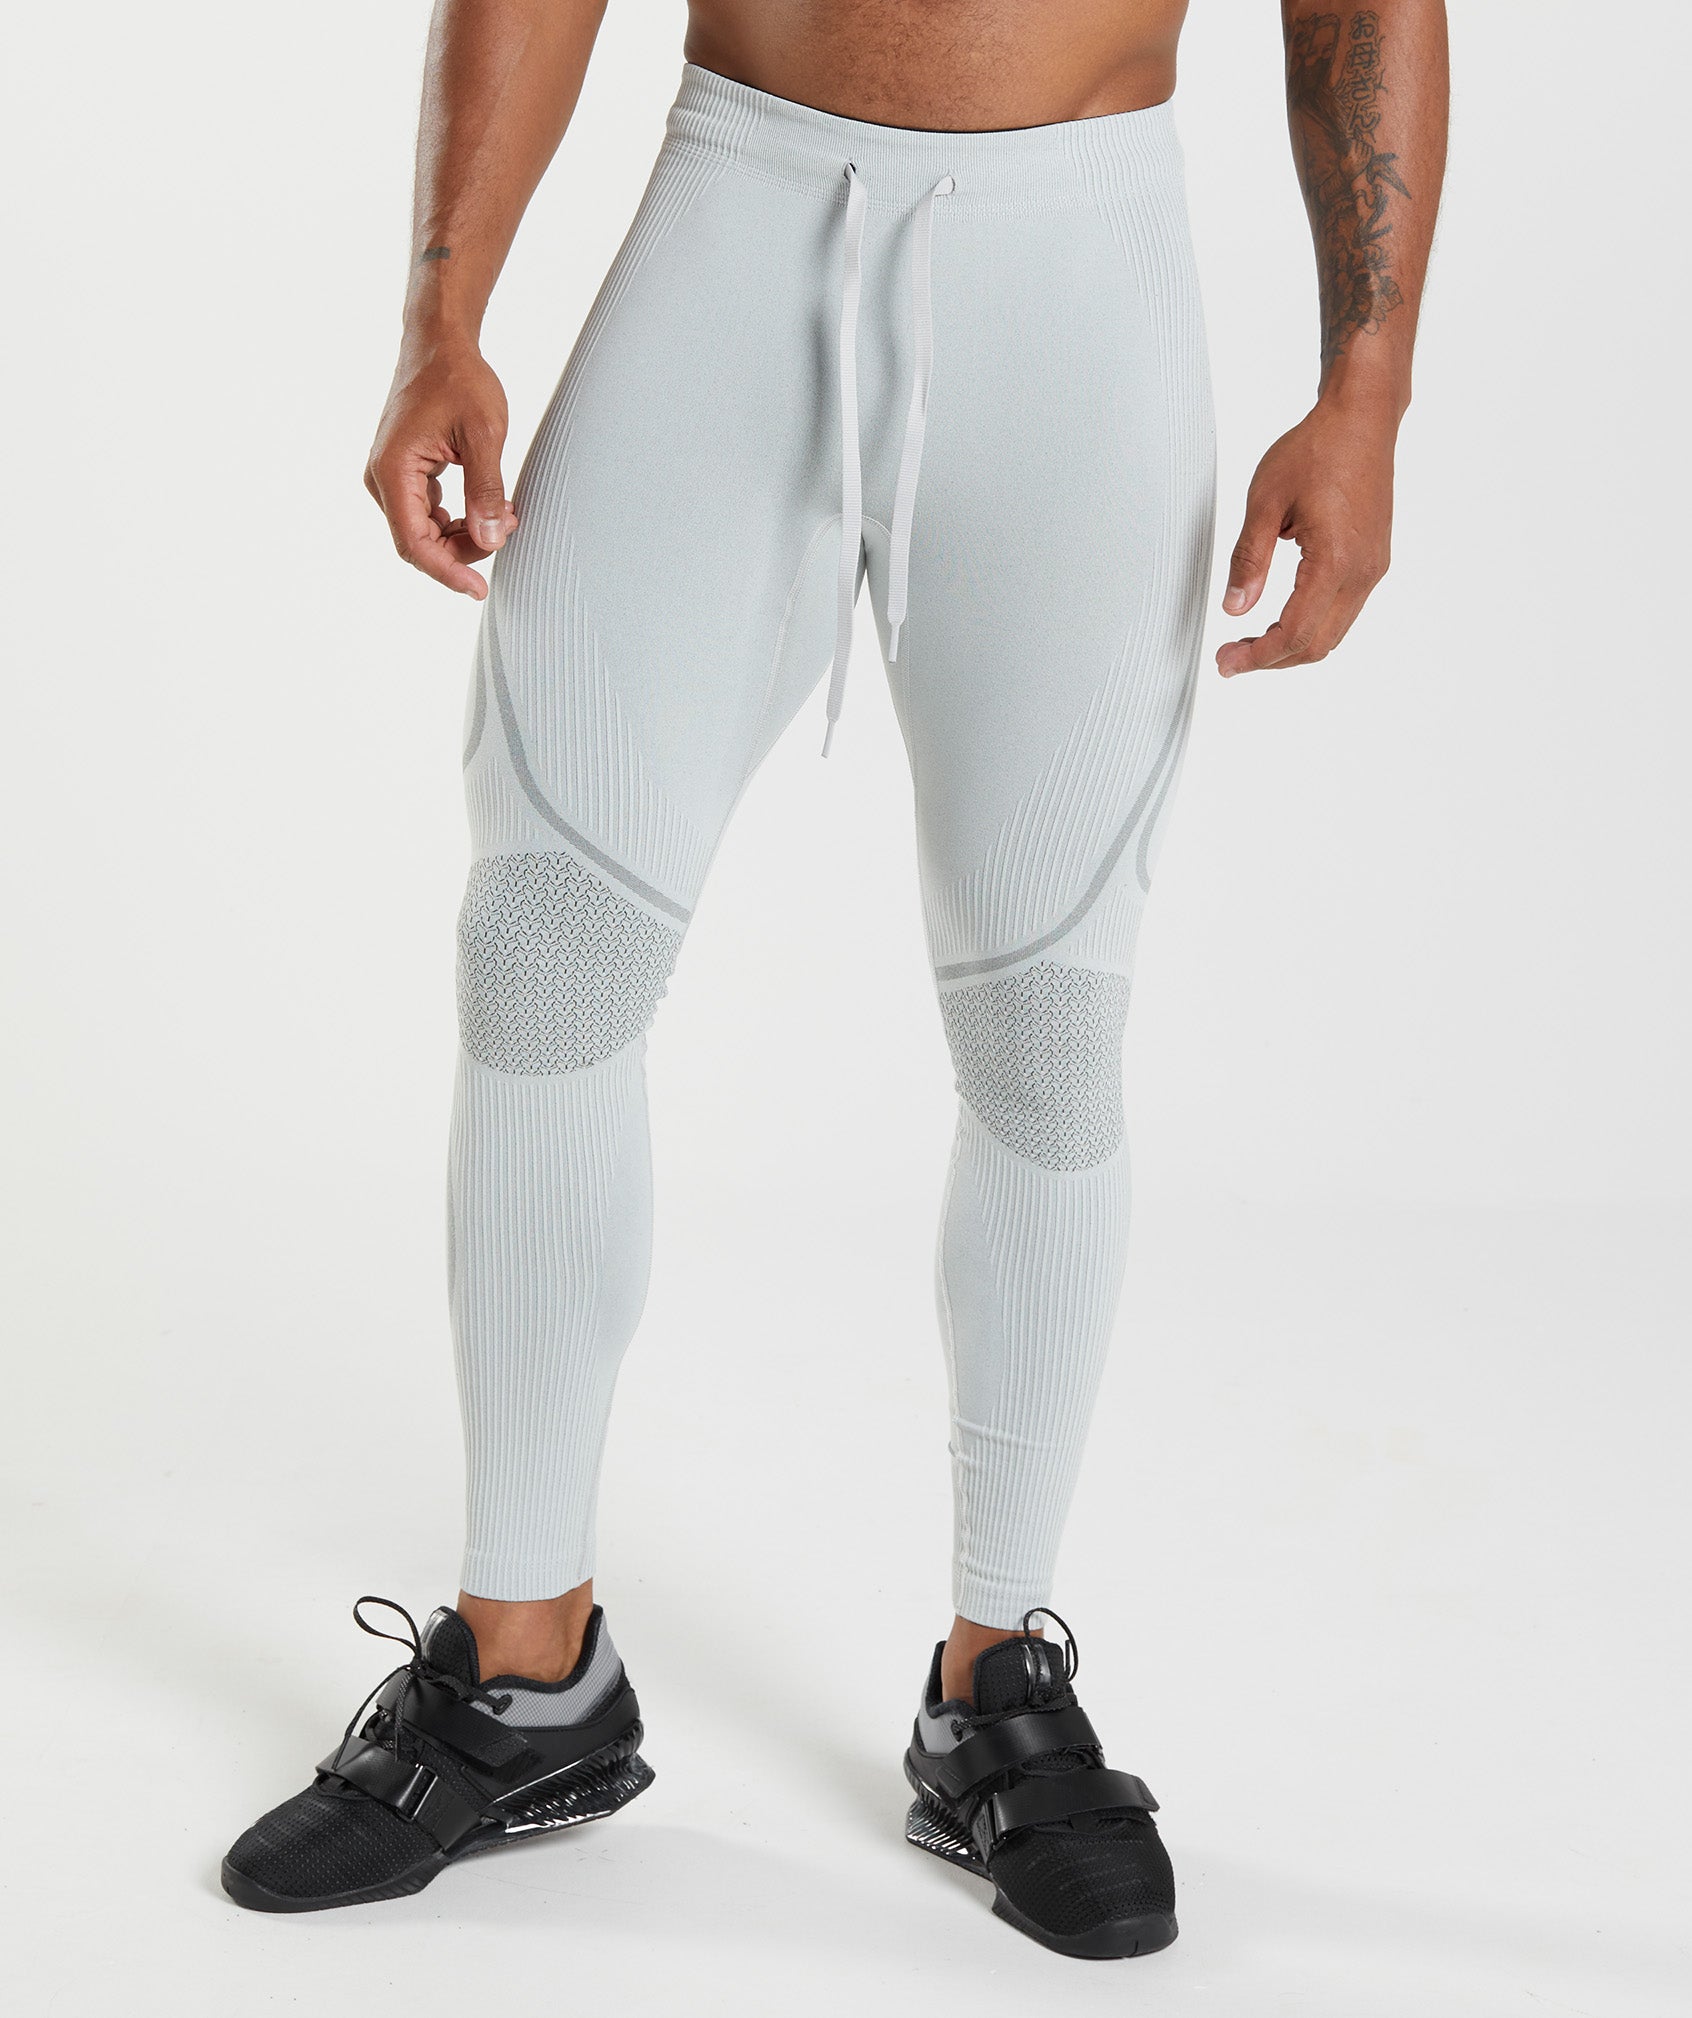 315 Seamless Tights in Light Grey/Charcoal Grey